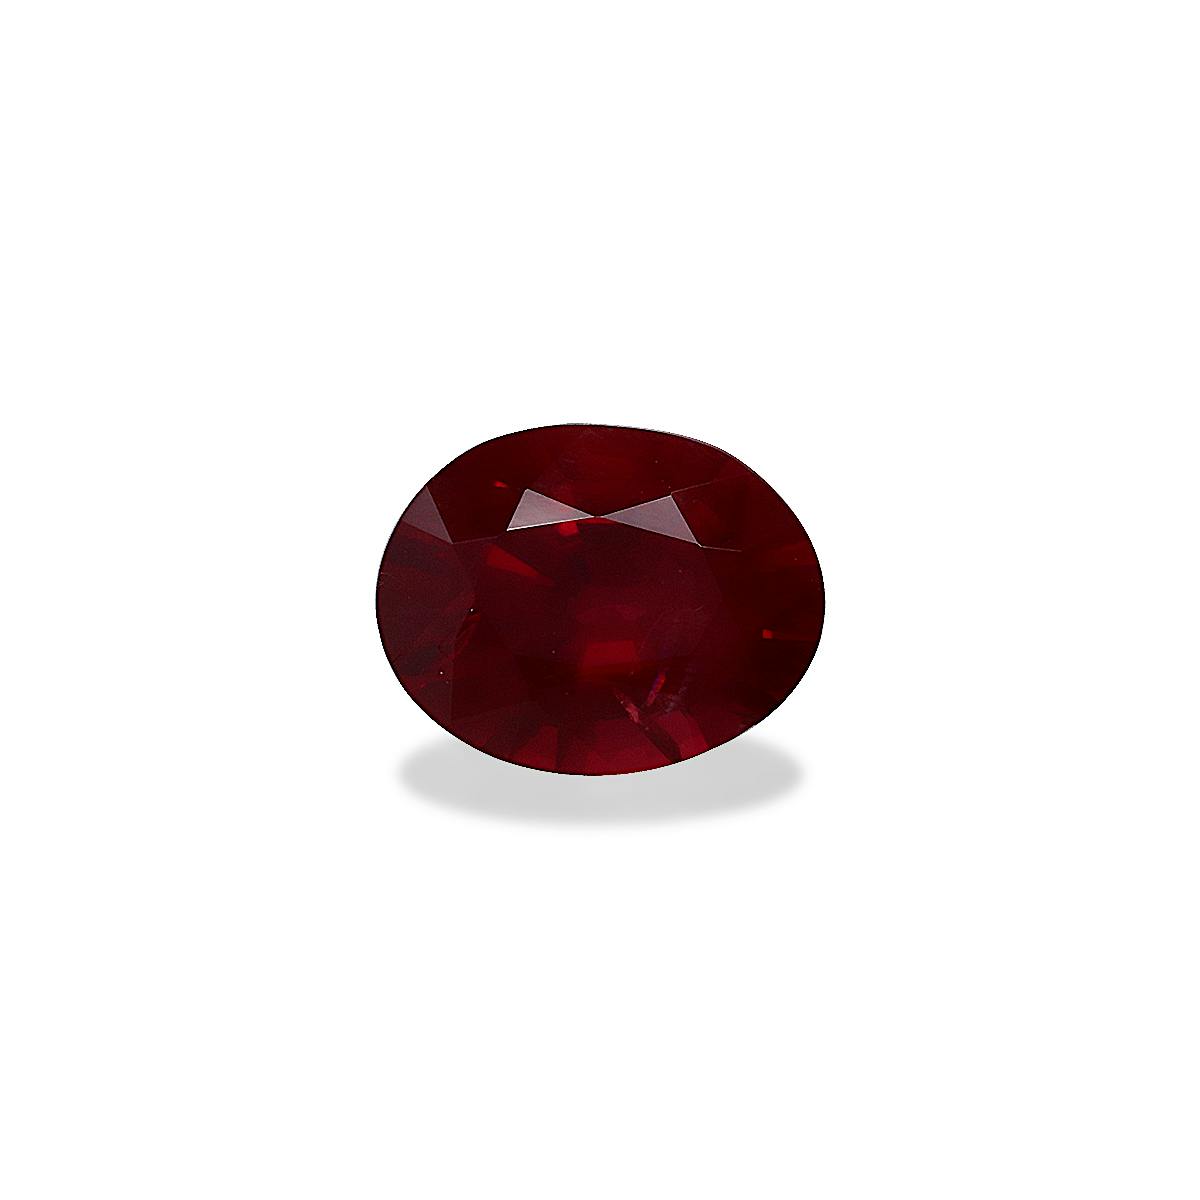 Mozambique Ruby 1.59ct - Main Image